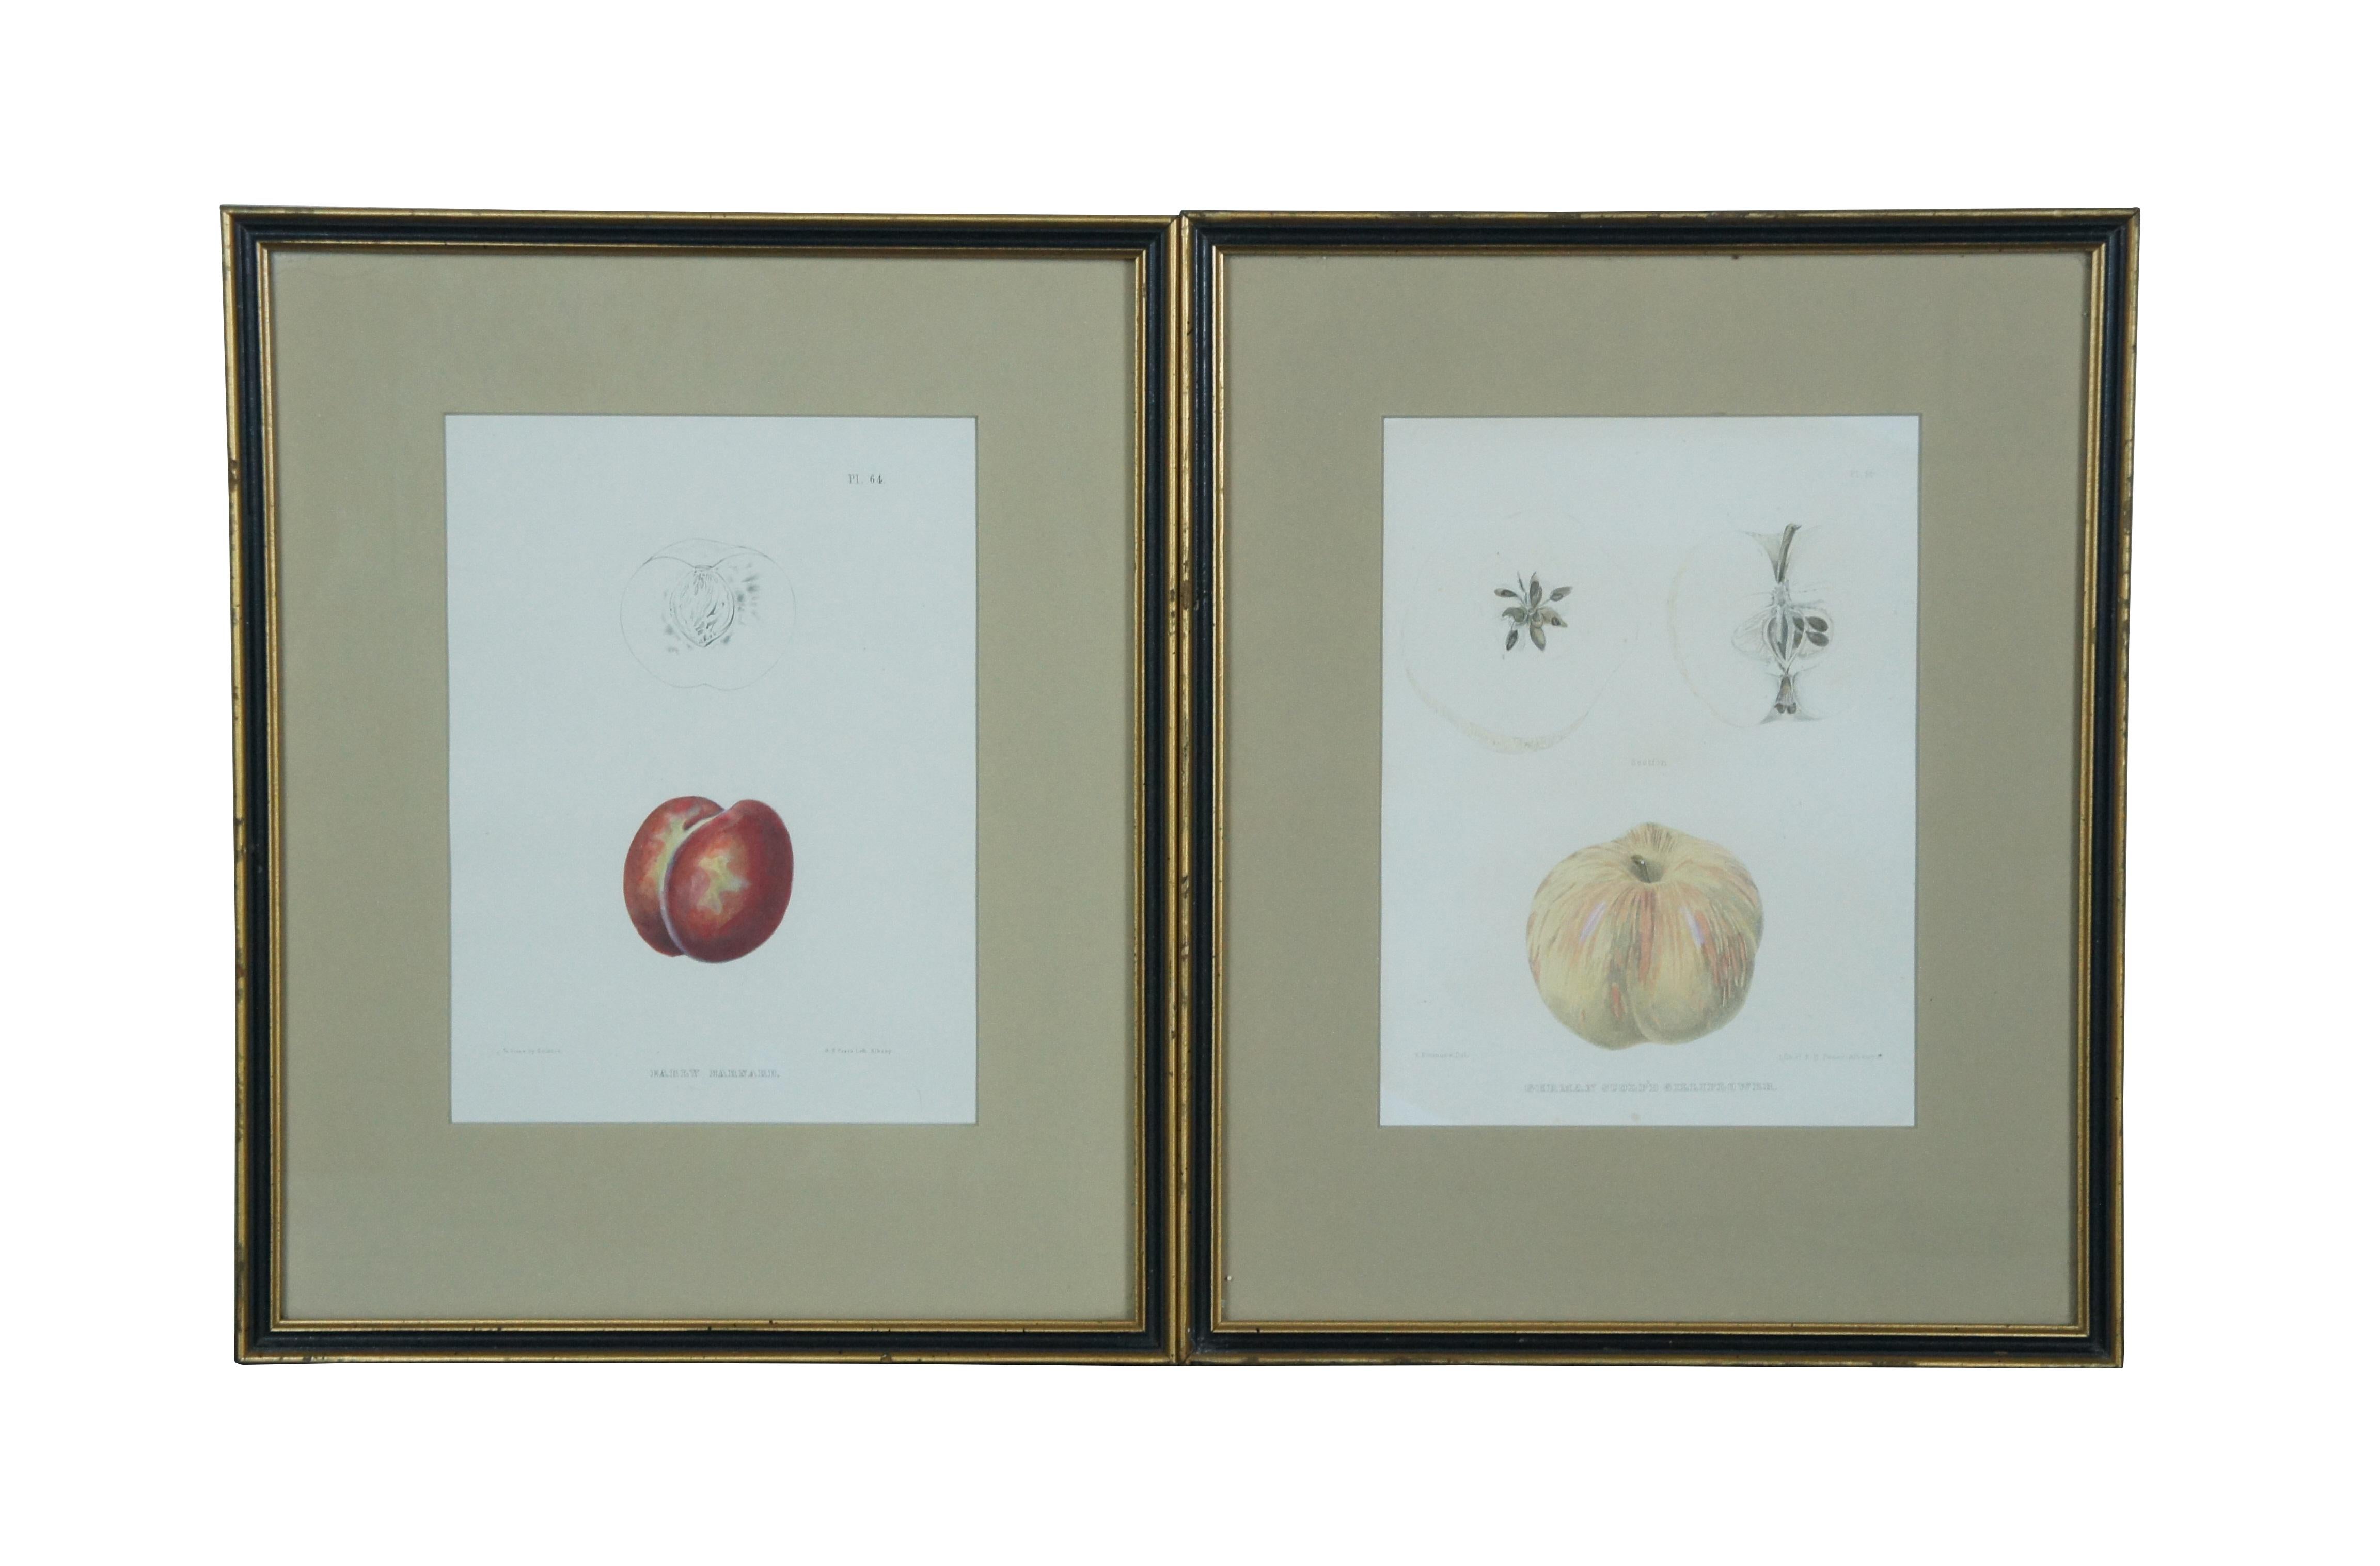 Set of five mid 19th century botanical style aquatint lithographs of varieties of apples and pears - German Scolp'd Gilliflower, Early Barnard, Dix, Beurre D'Aremerg, and 1 Washington 2 Flemish Beauty. Art by Ebenezer Emmons Jr, J. Wilson, and